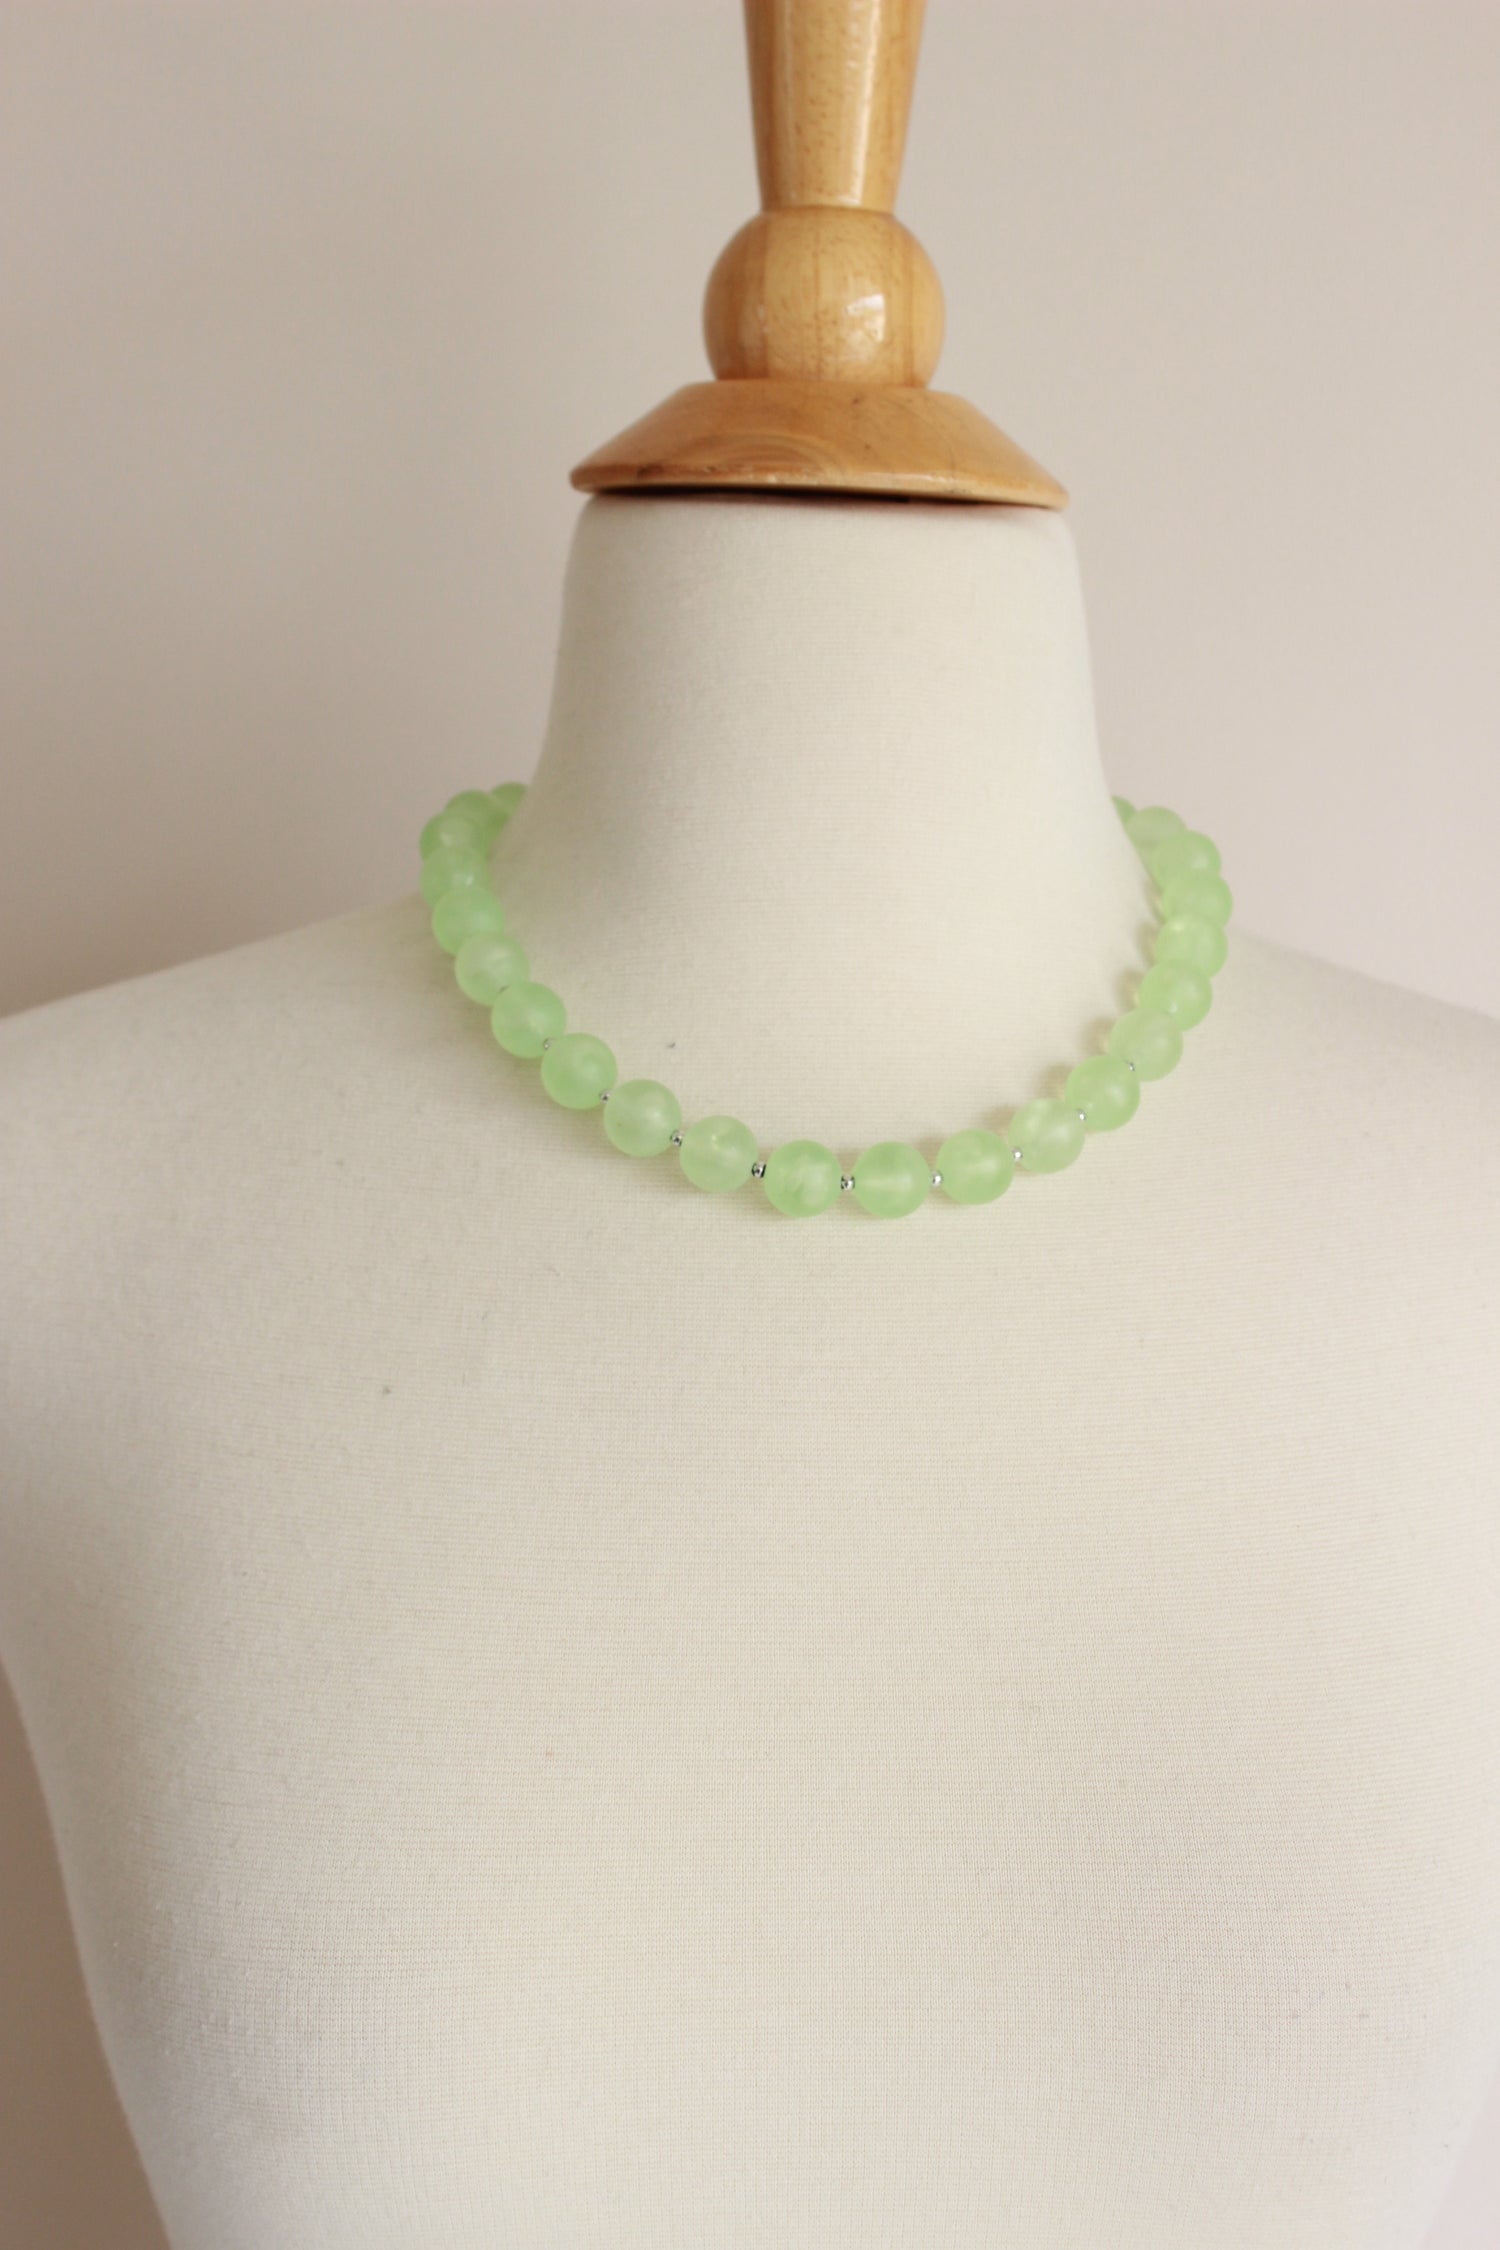 Vintage 1950s Green Round Bead Necklace